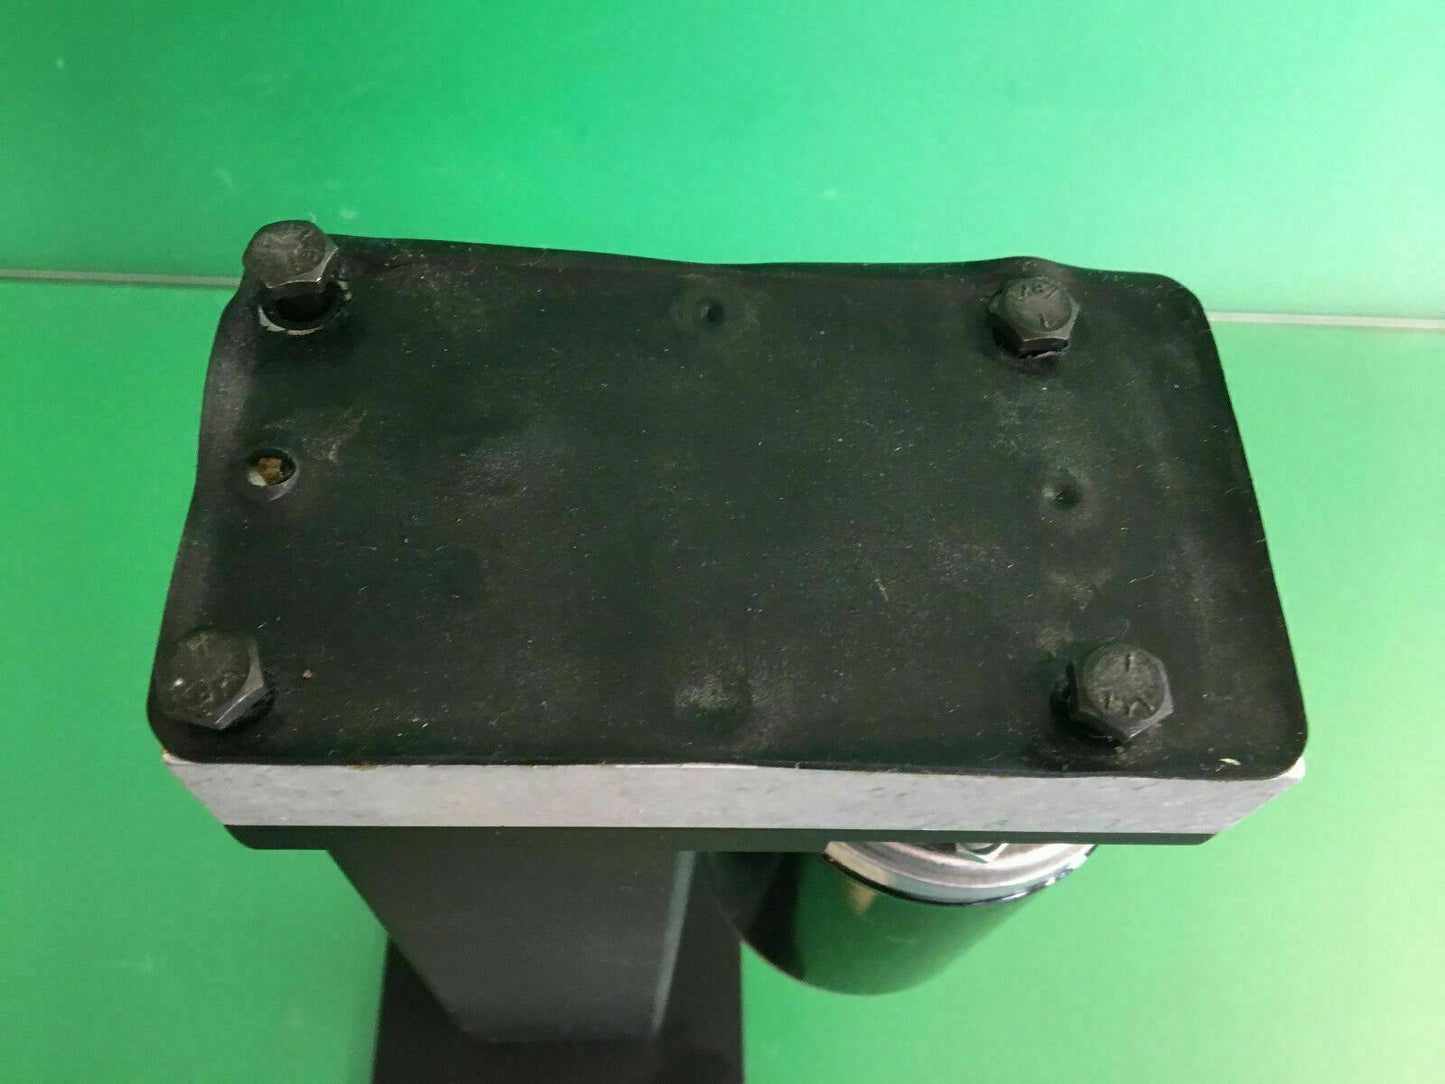 Seat Elevator Actuator for Invacare TDX SP Powerchair 73464  /  PJ26026R  #B369